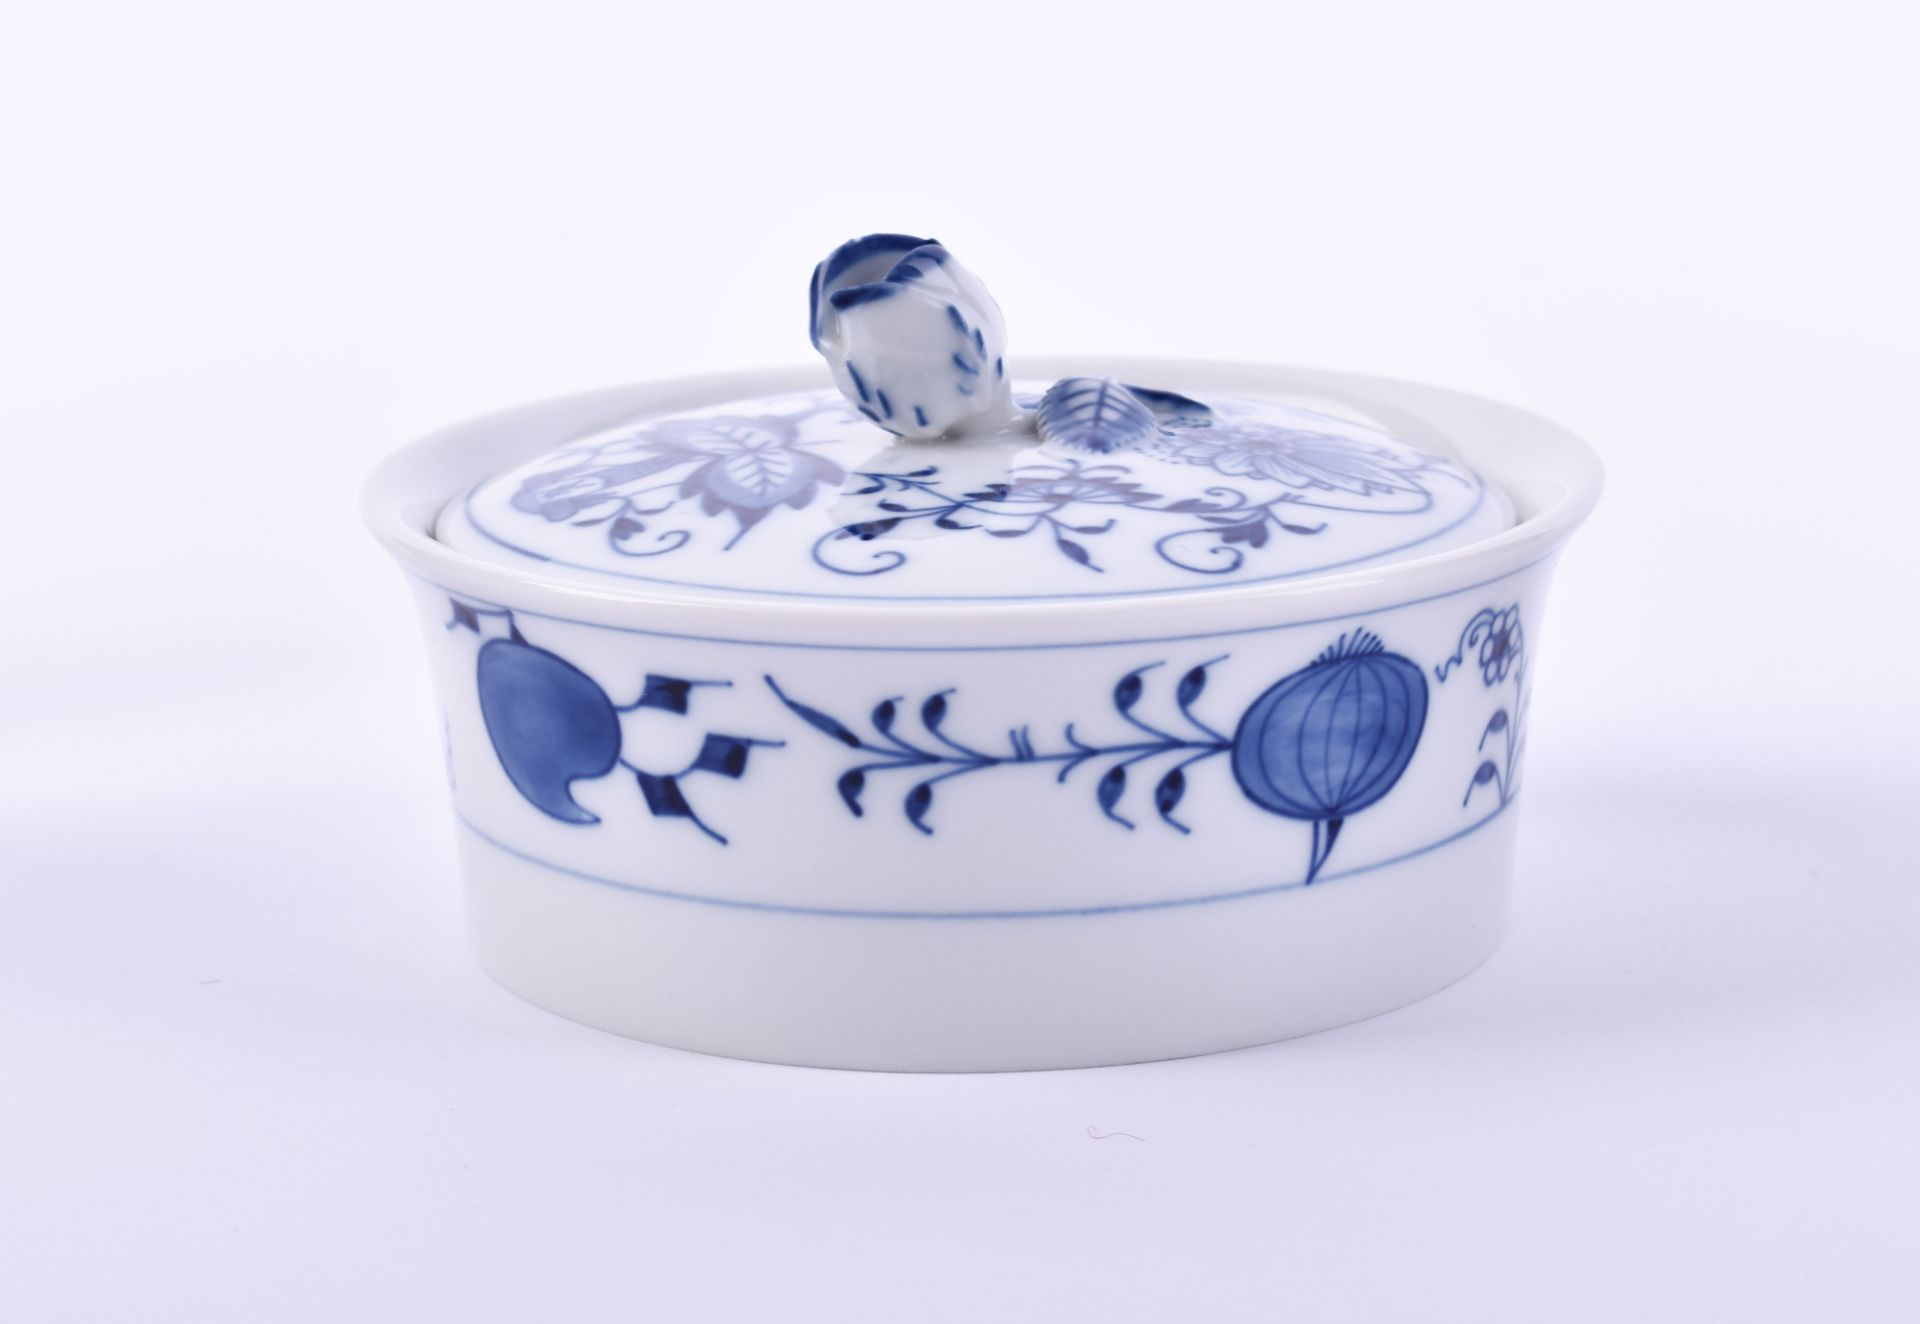  Butter dish Meissen  - Image 2 of 6